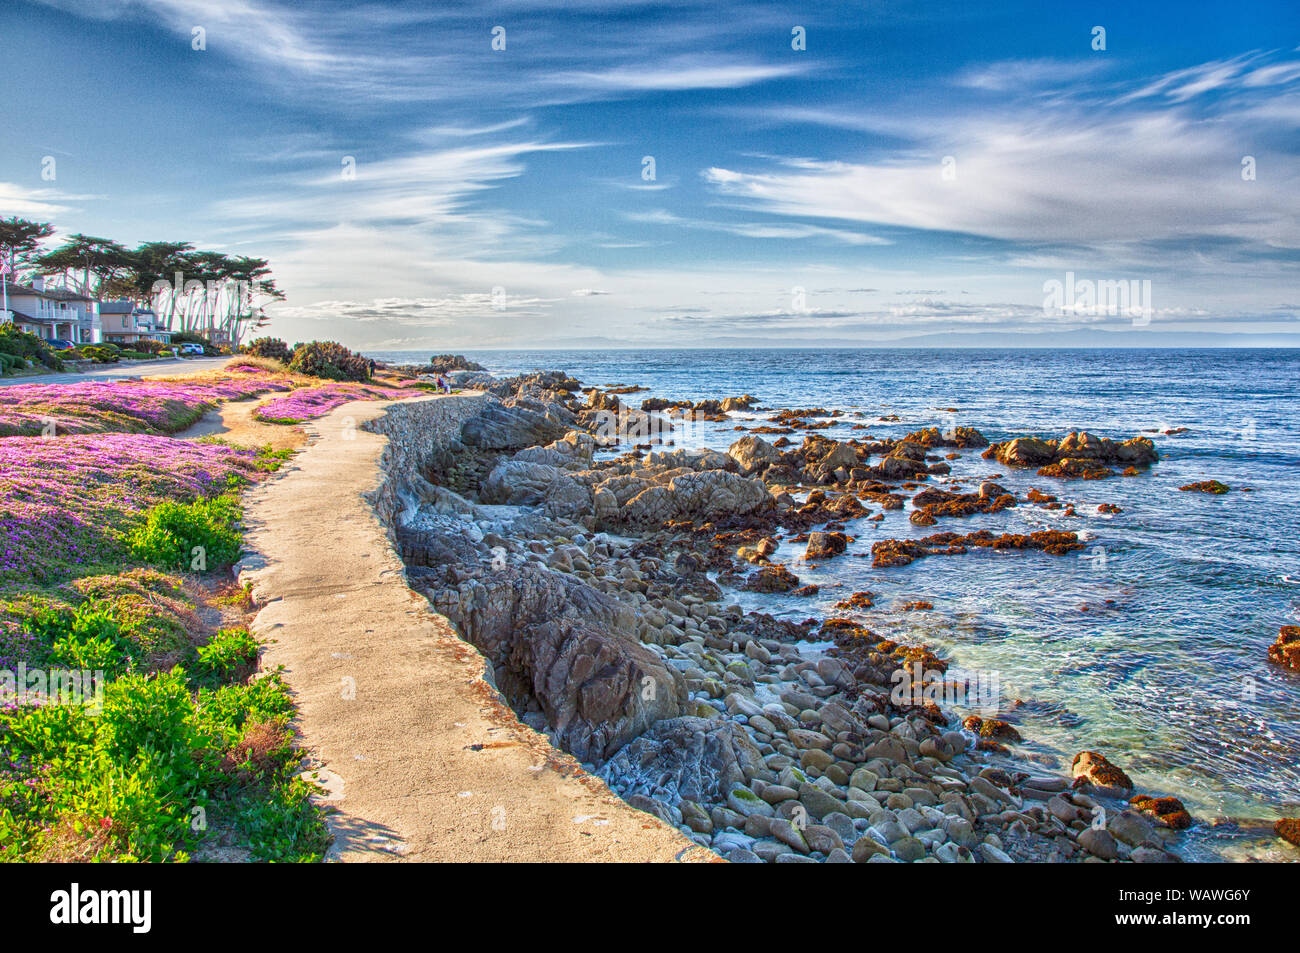 Pacific Grove, California's walkways and parks along the beach make for a relaxing stroll. Stock Photo